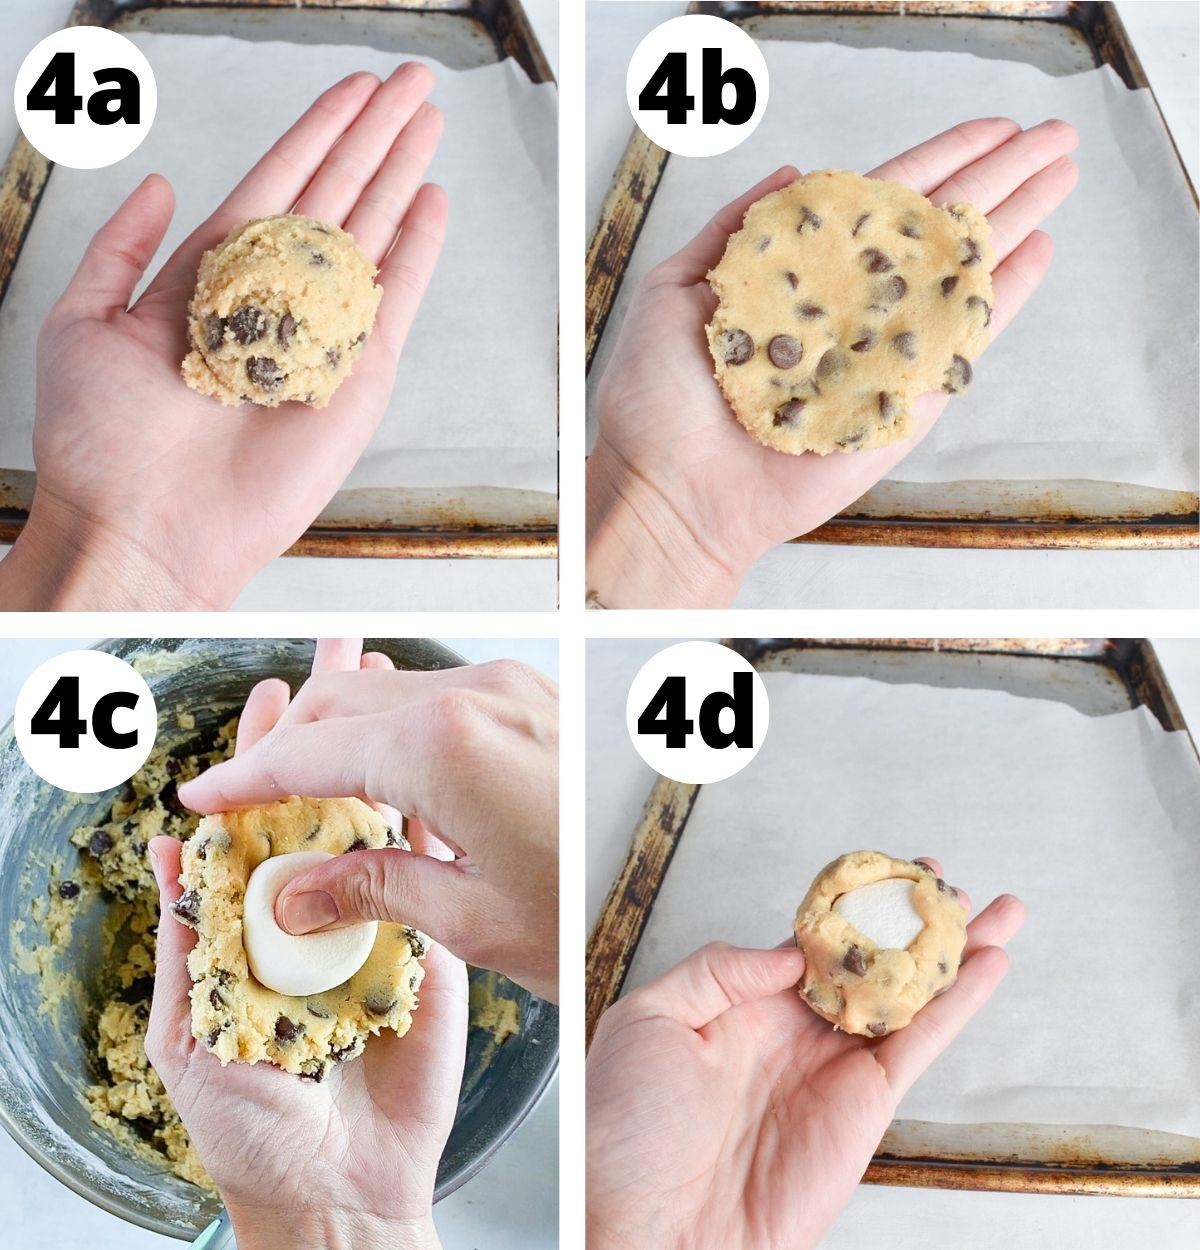 4 images showing how to stuff a marshmallow in the cookie dough. 